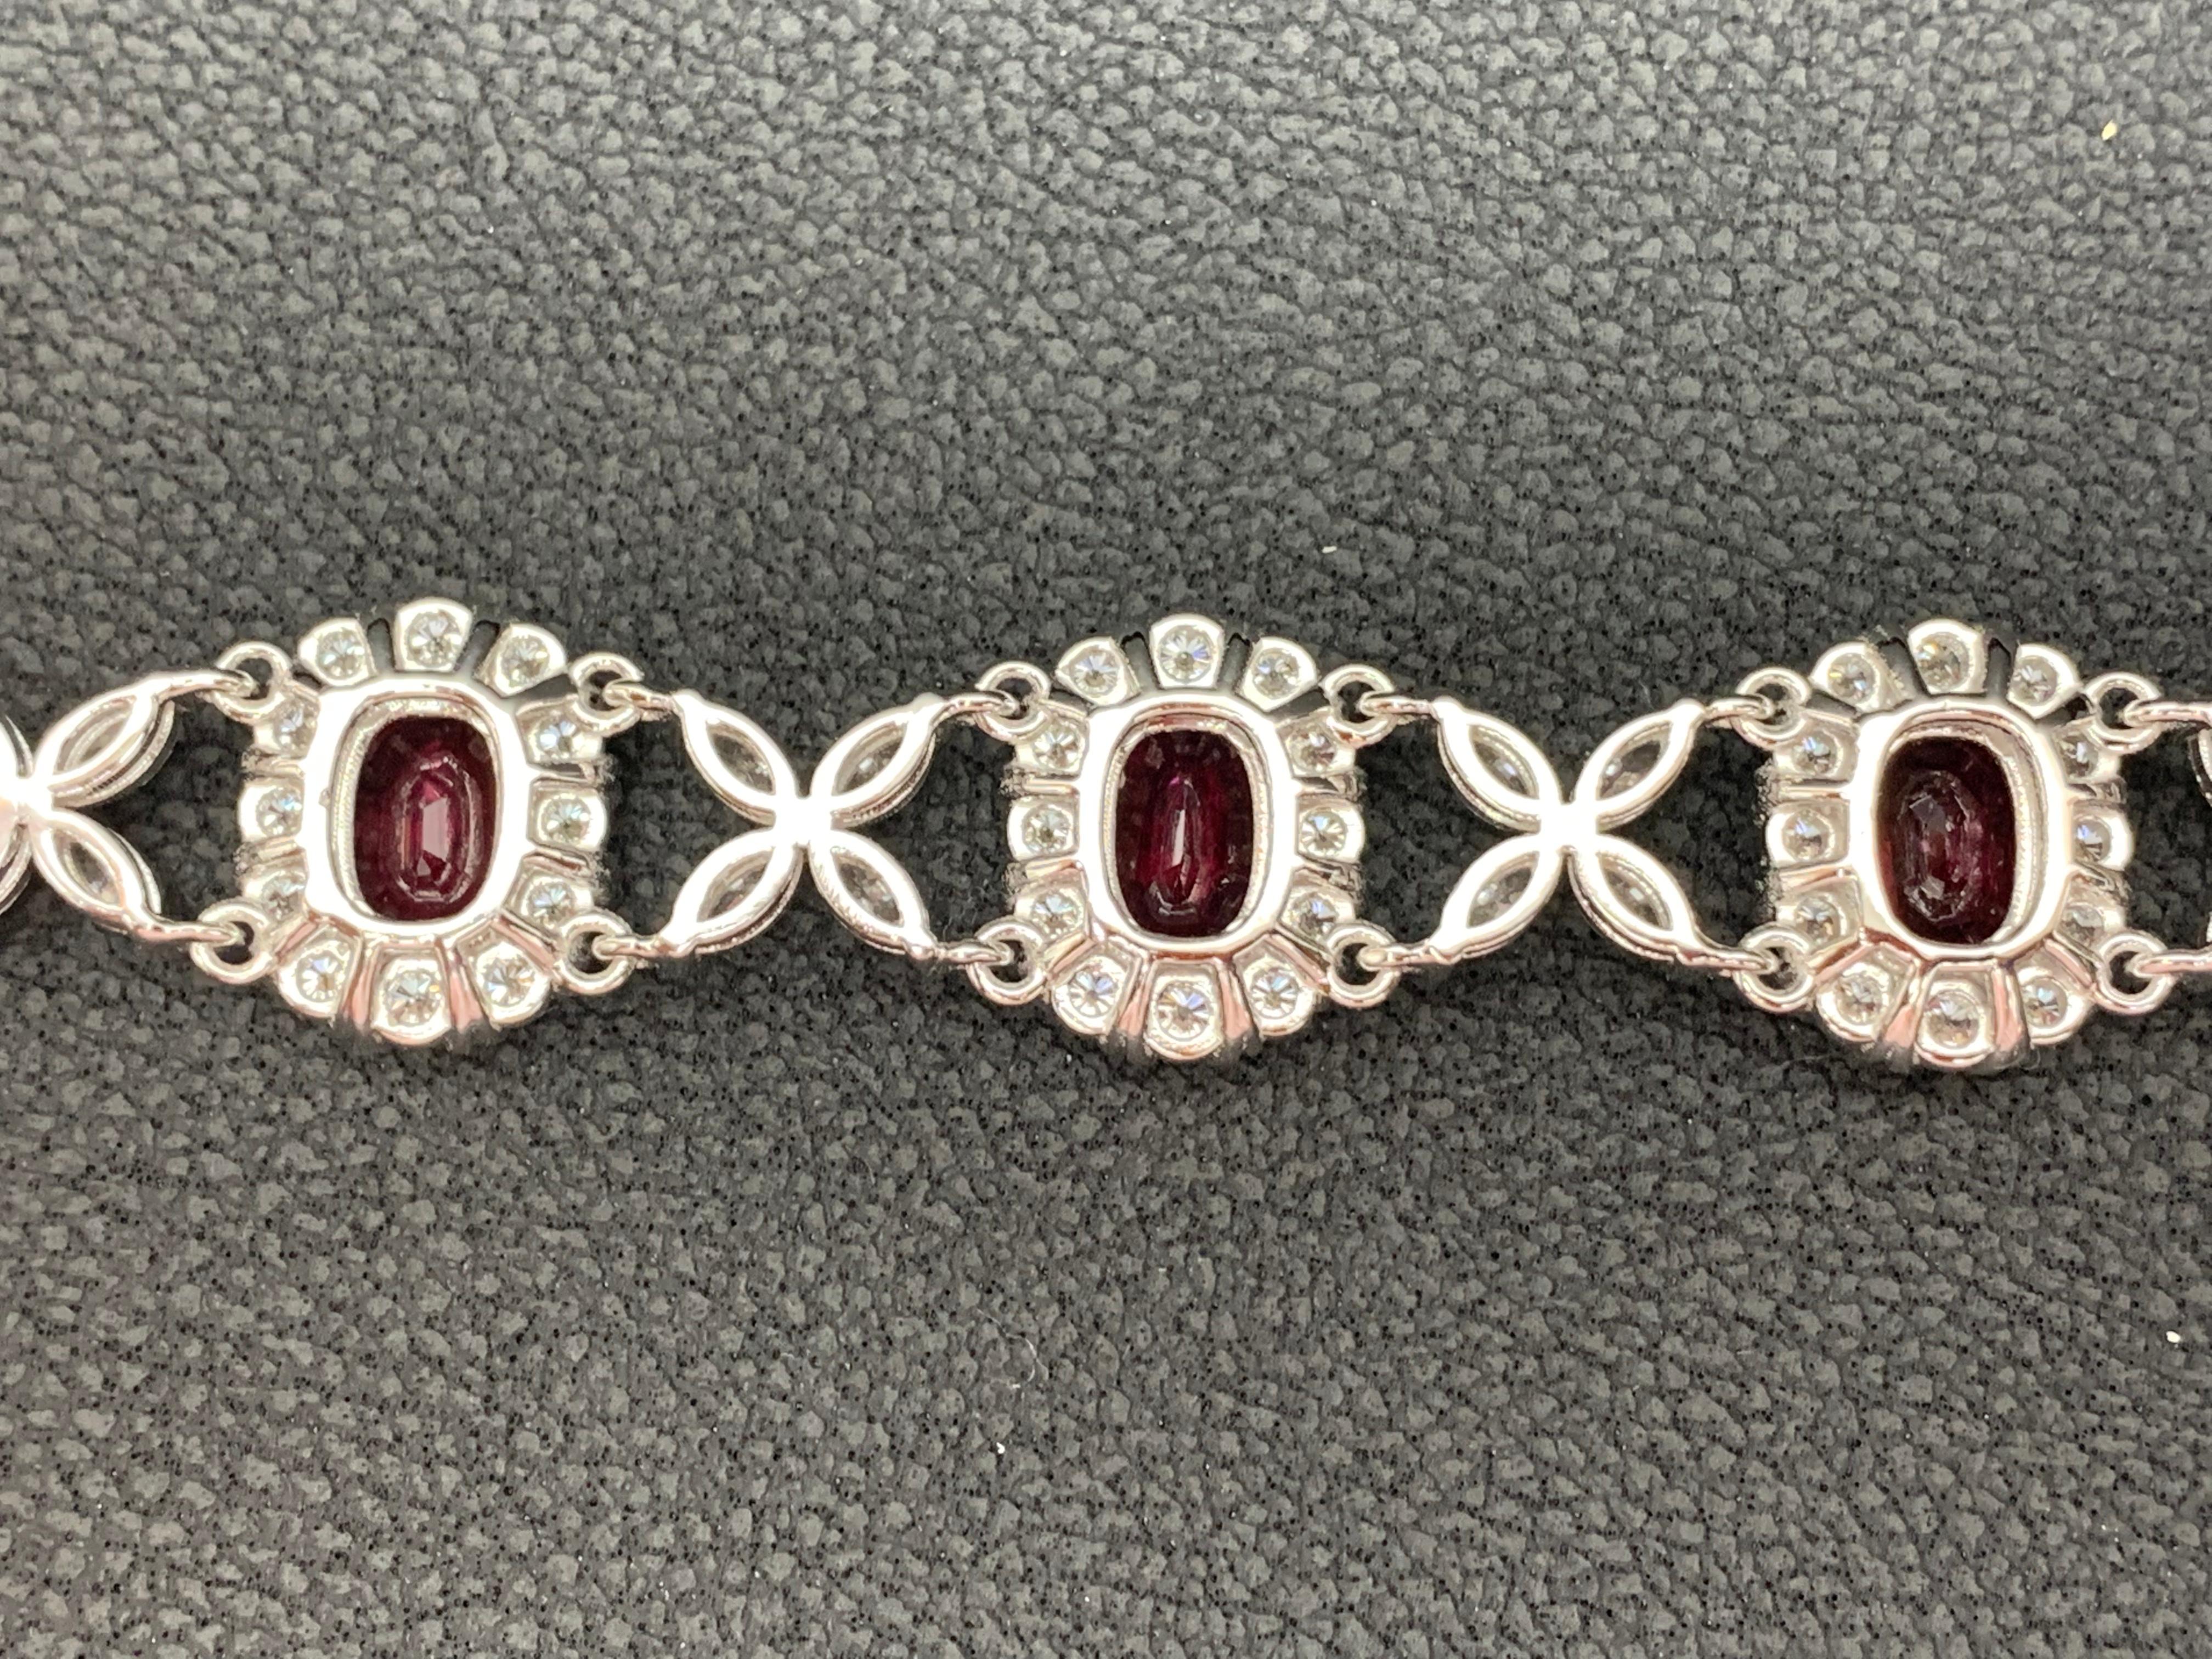 12.54 Carat Oval Cut Ruby and Diamond Tennis Bracelet in 14K White Gold For Sale 3